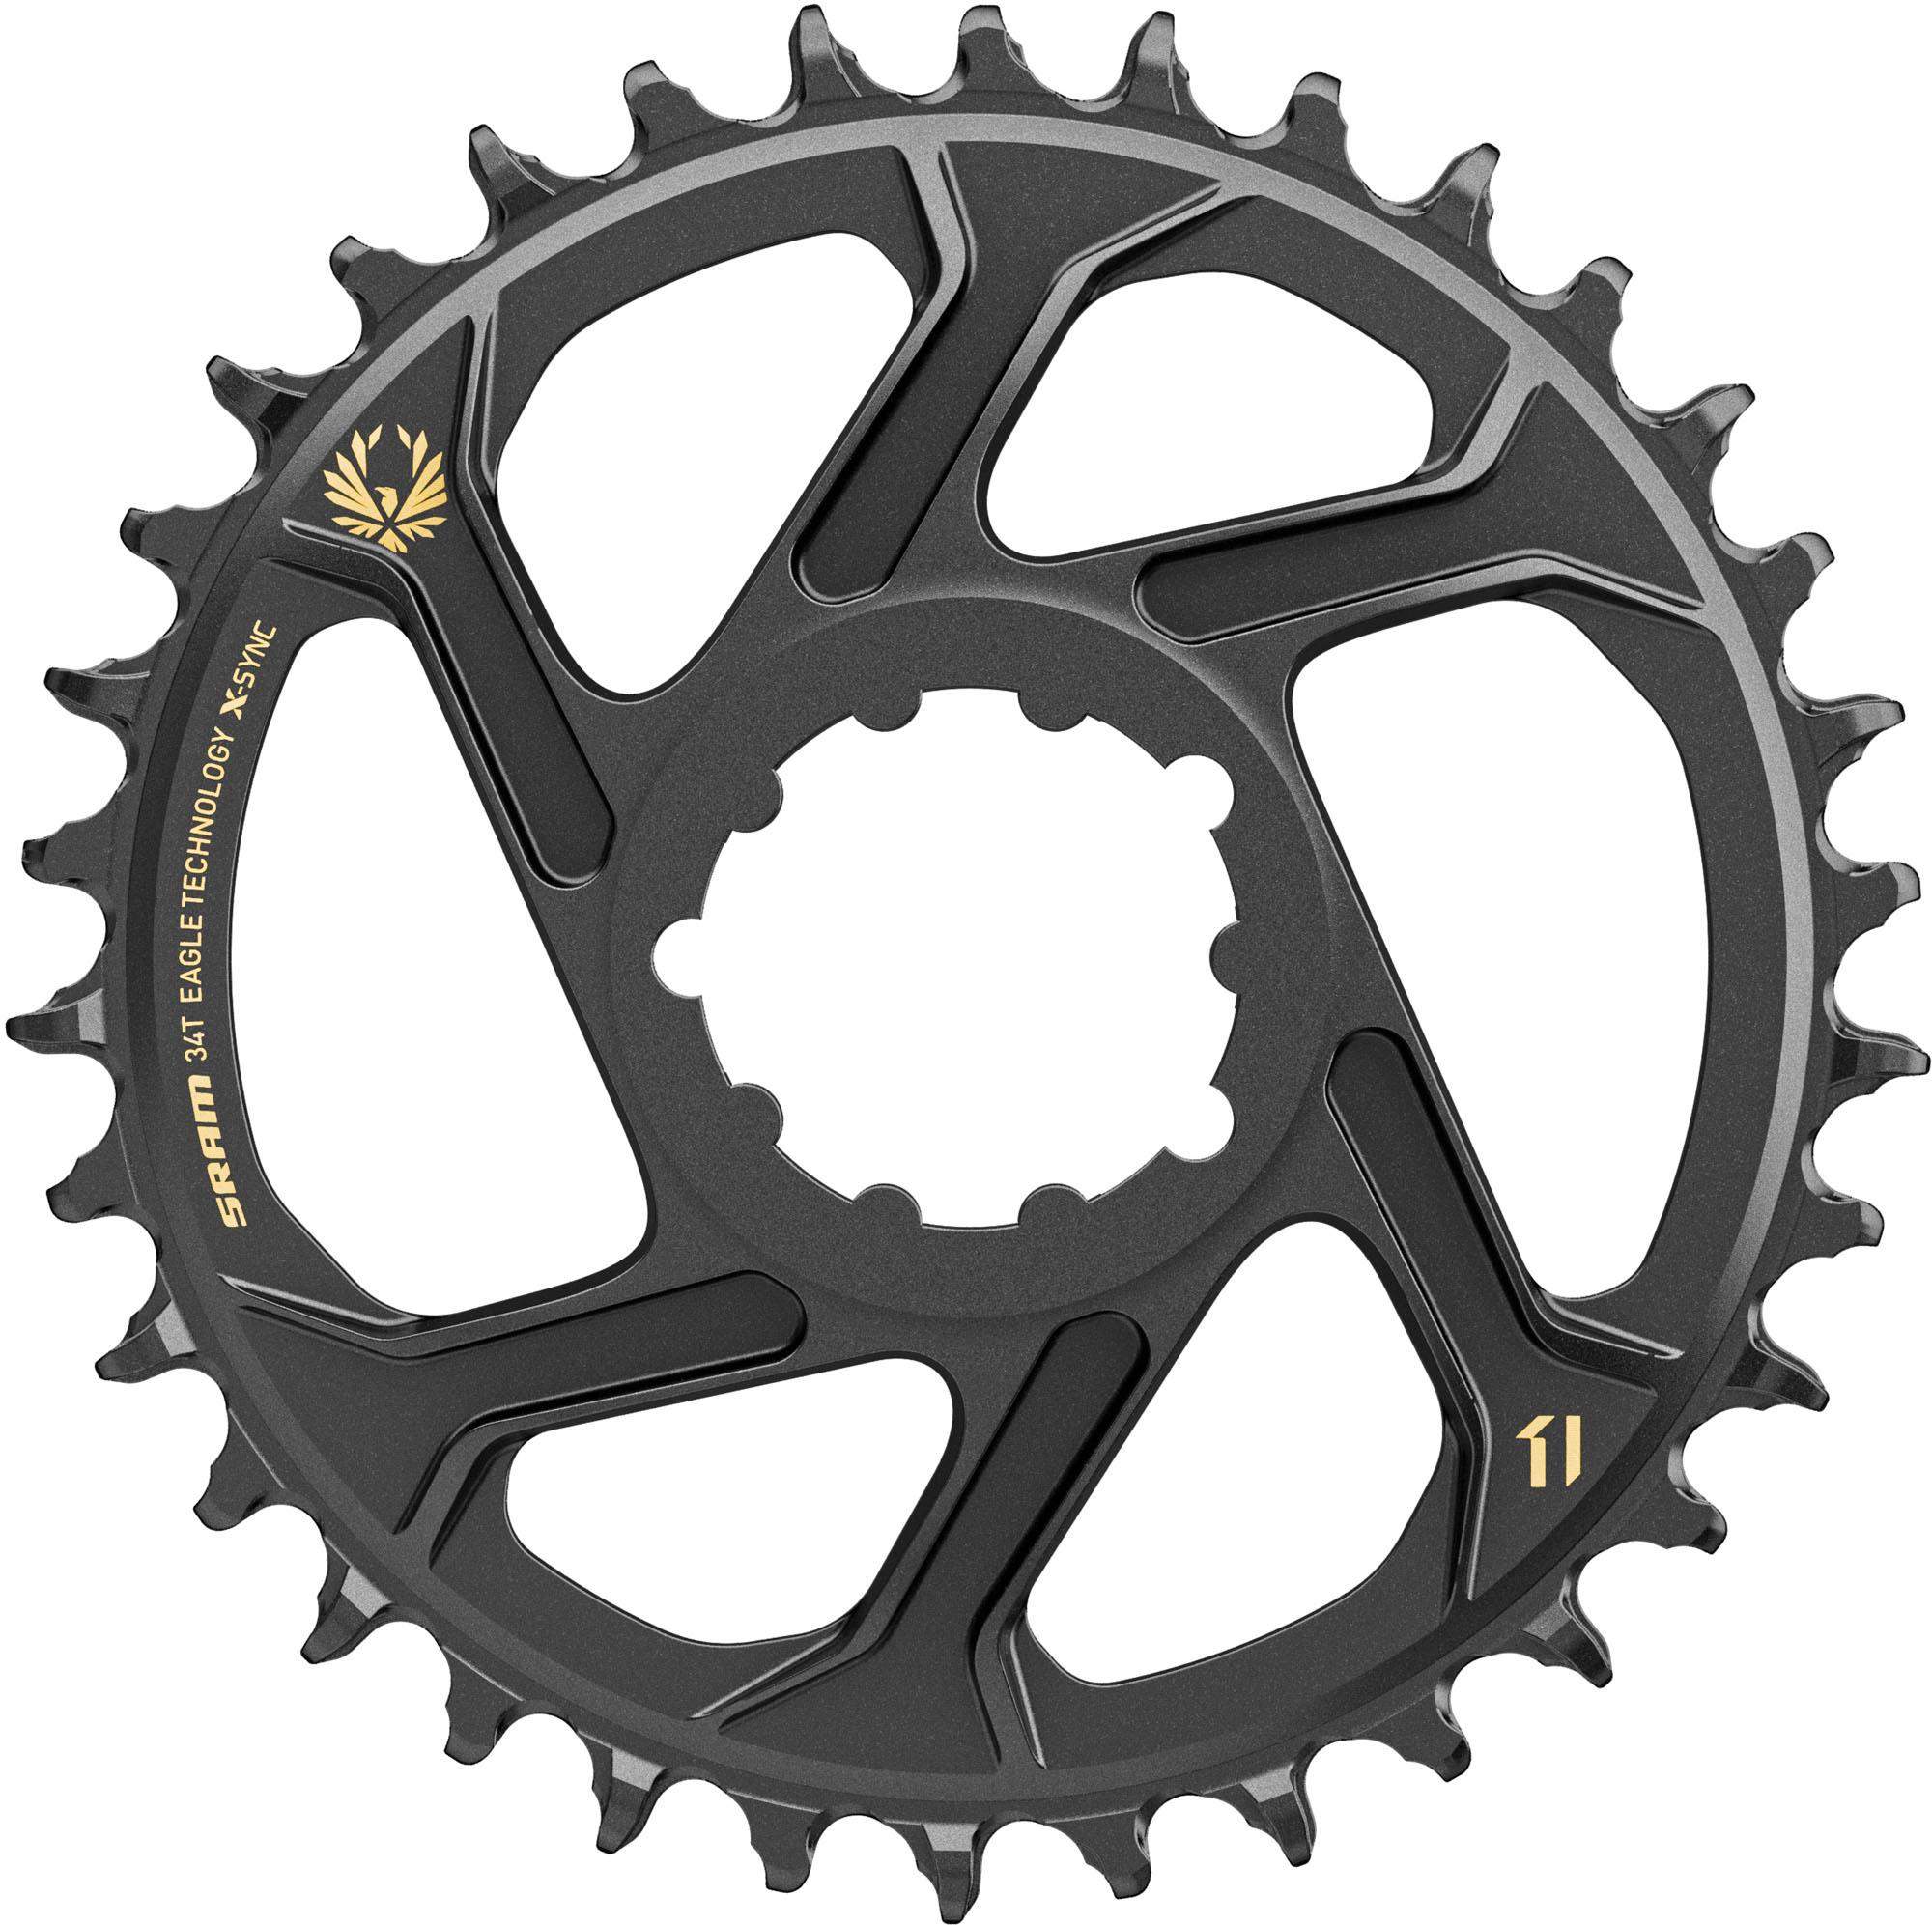 Sram X-sync Direct Mount Eagle Chainring  Gold